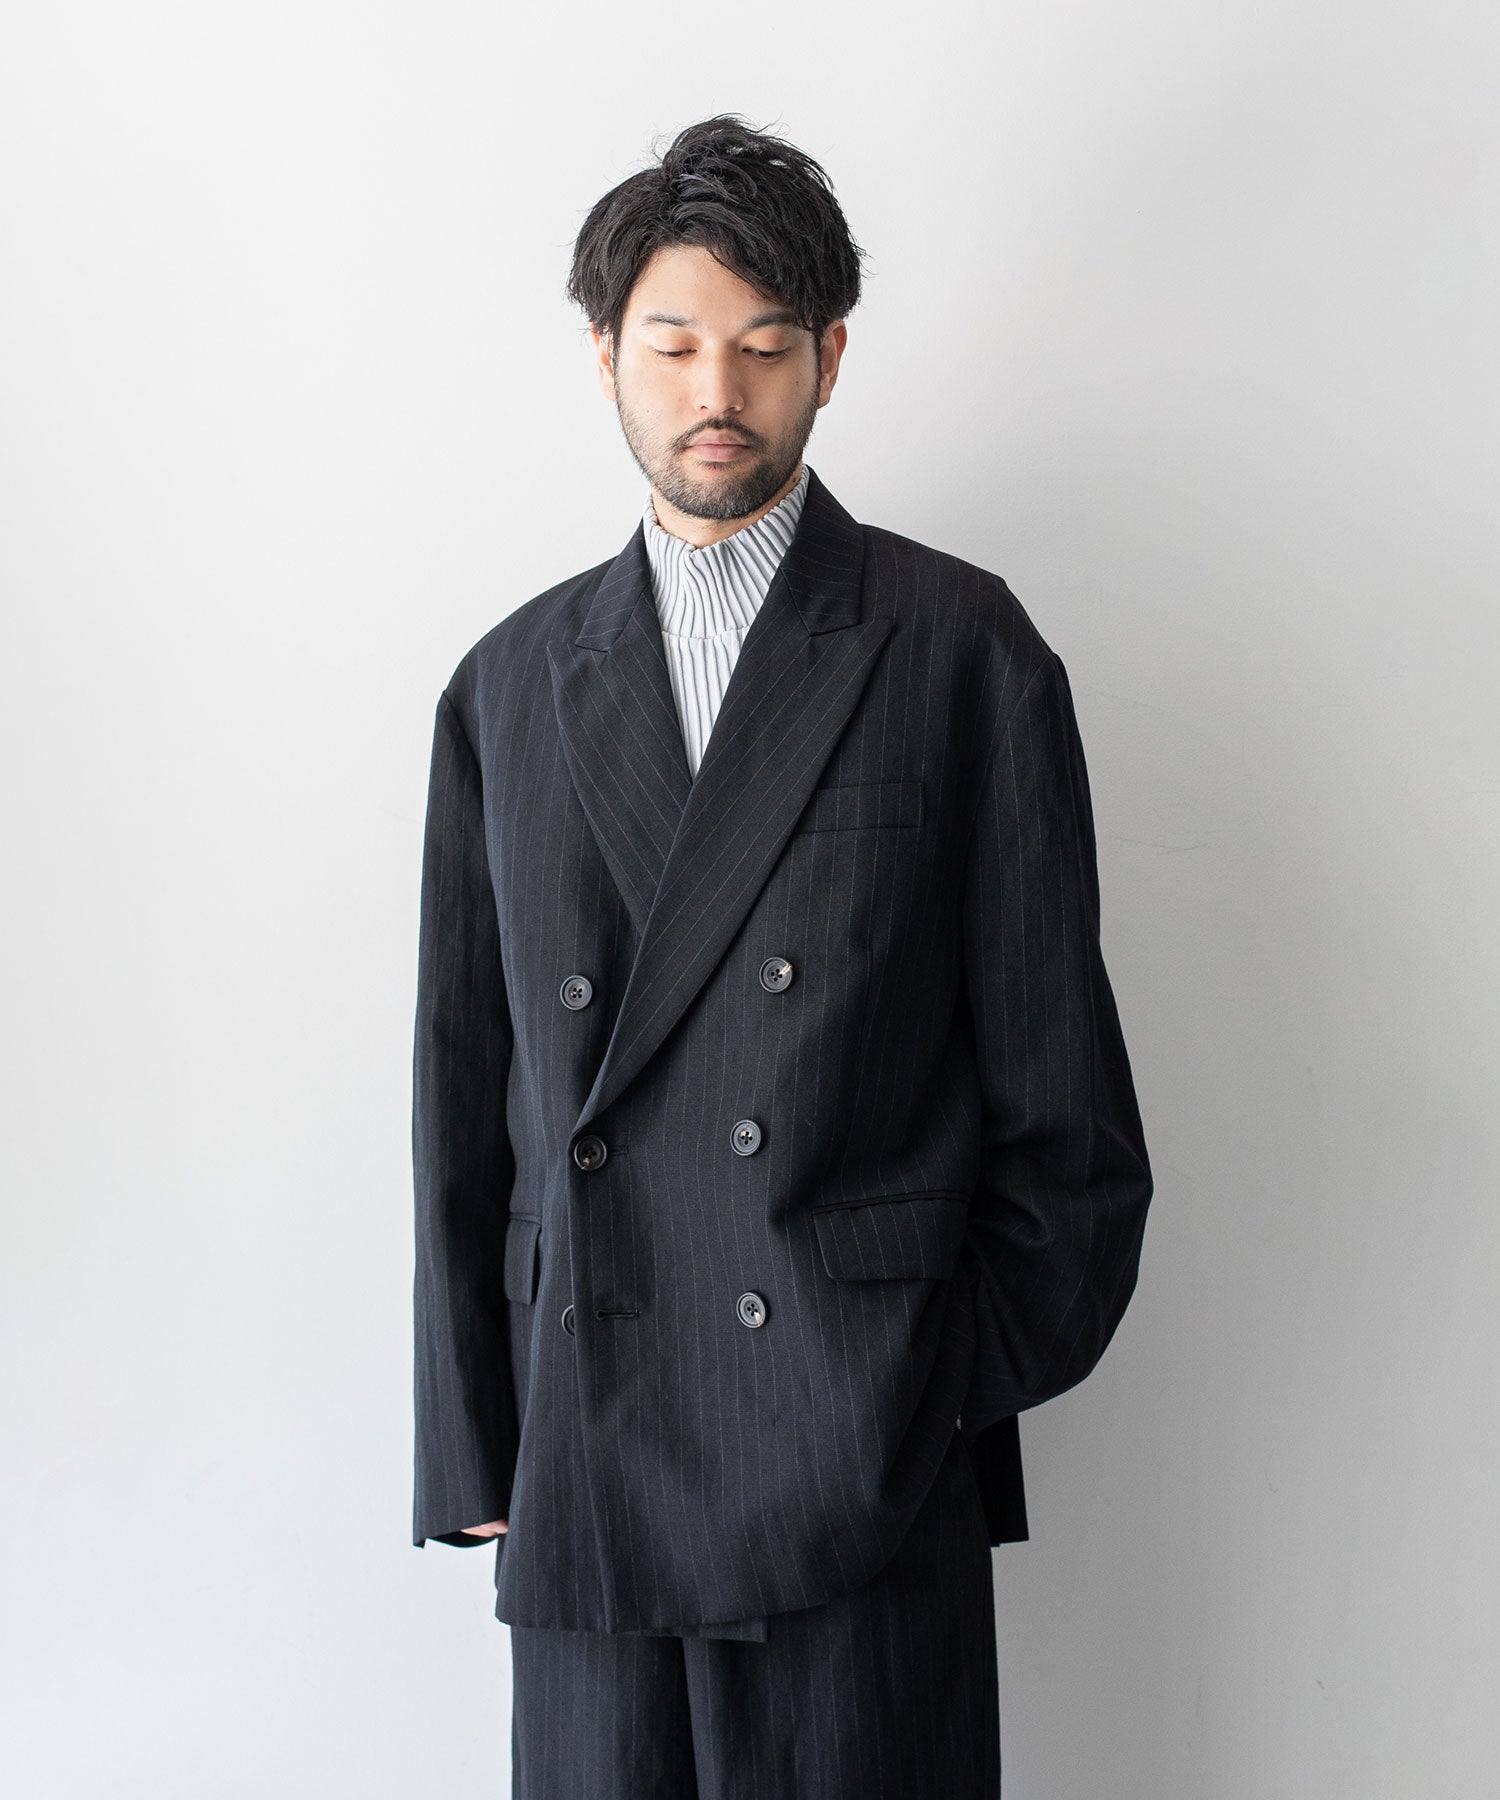 stein(シュタイン)の23AWコレクションOVERSIZED DOUBLE BREASTED JACKETのBLACK